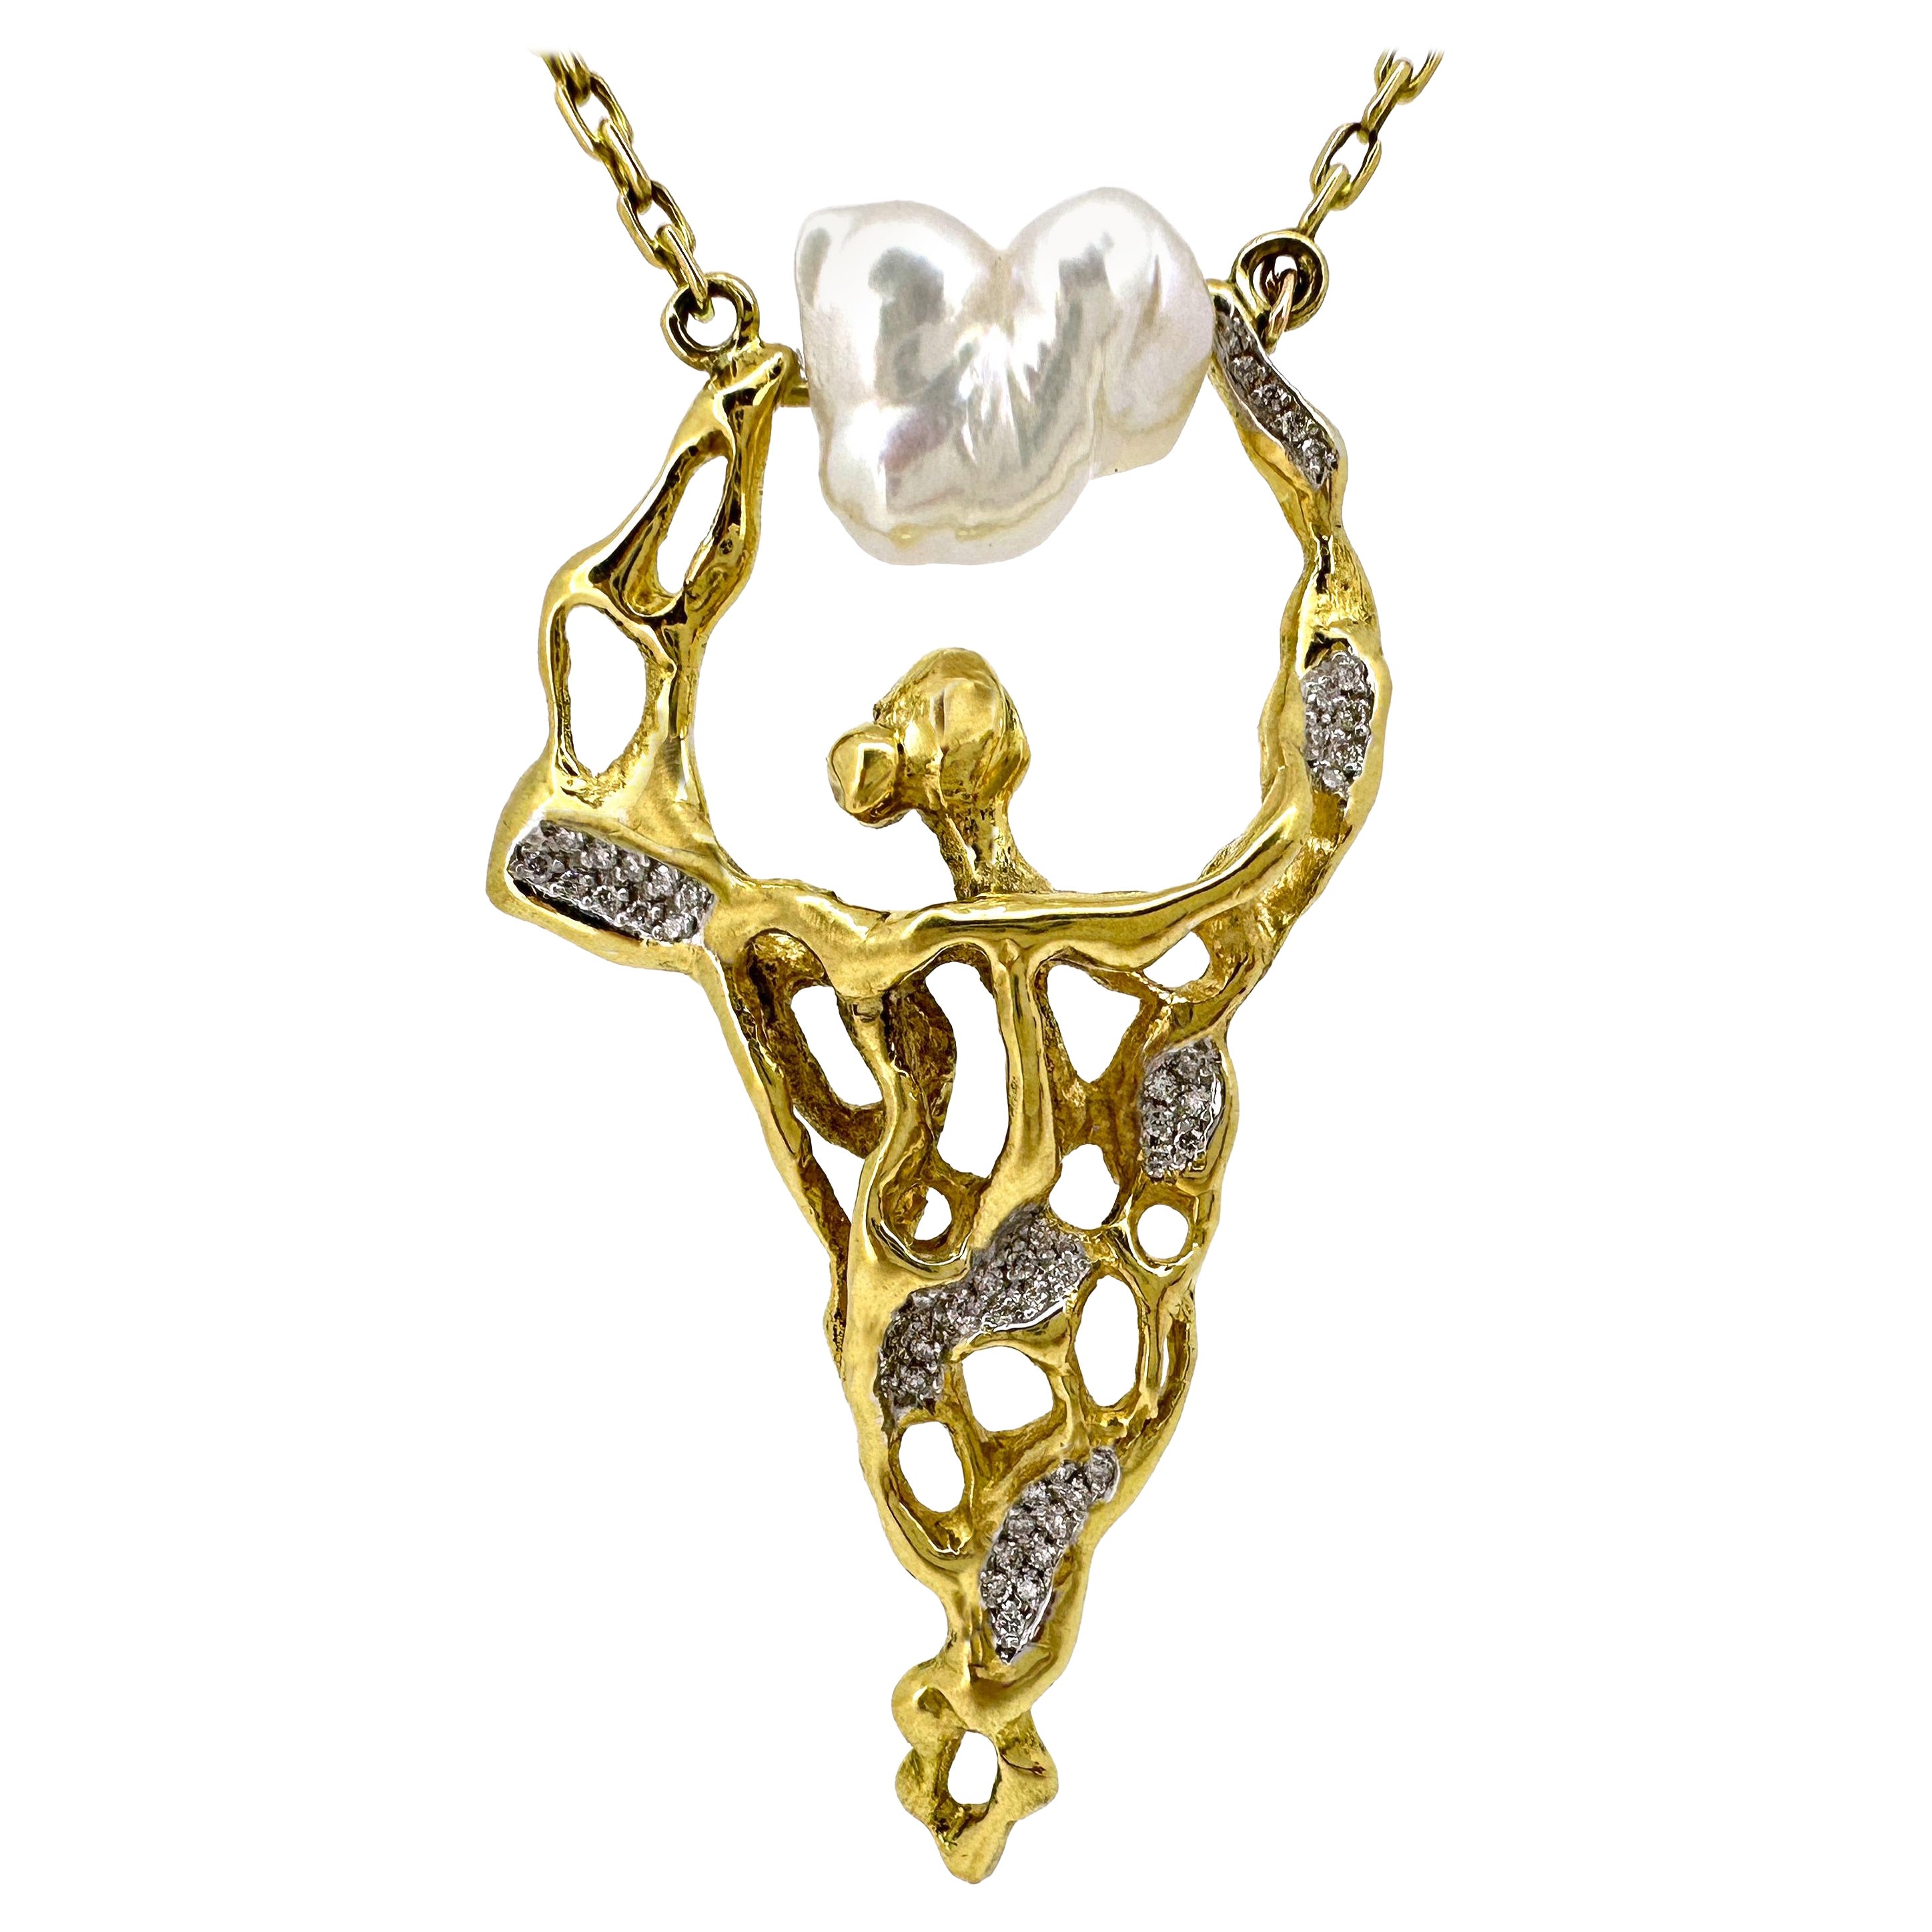 "Cloud Dancer" Necklace in 18K Gold, Diamonds & Baroque Pearl by Eytan Brandes For Sale